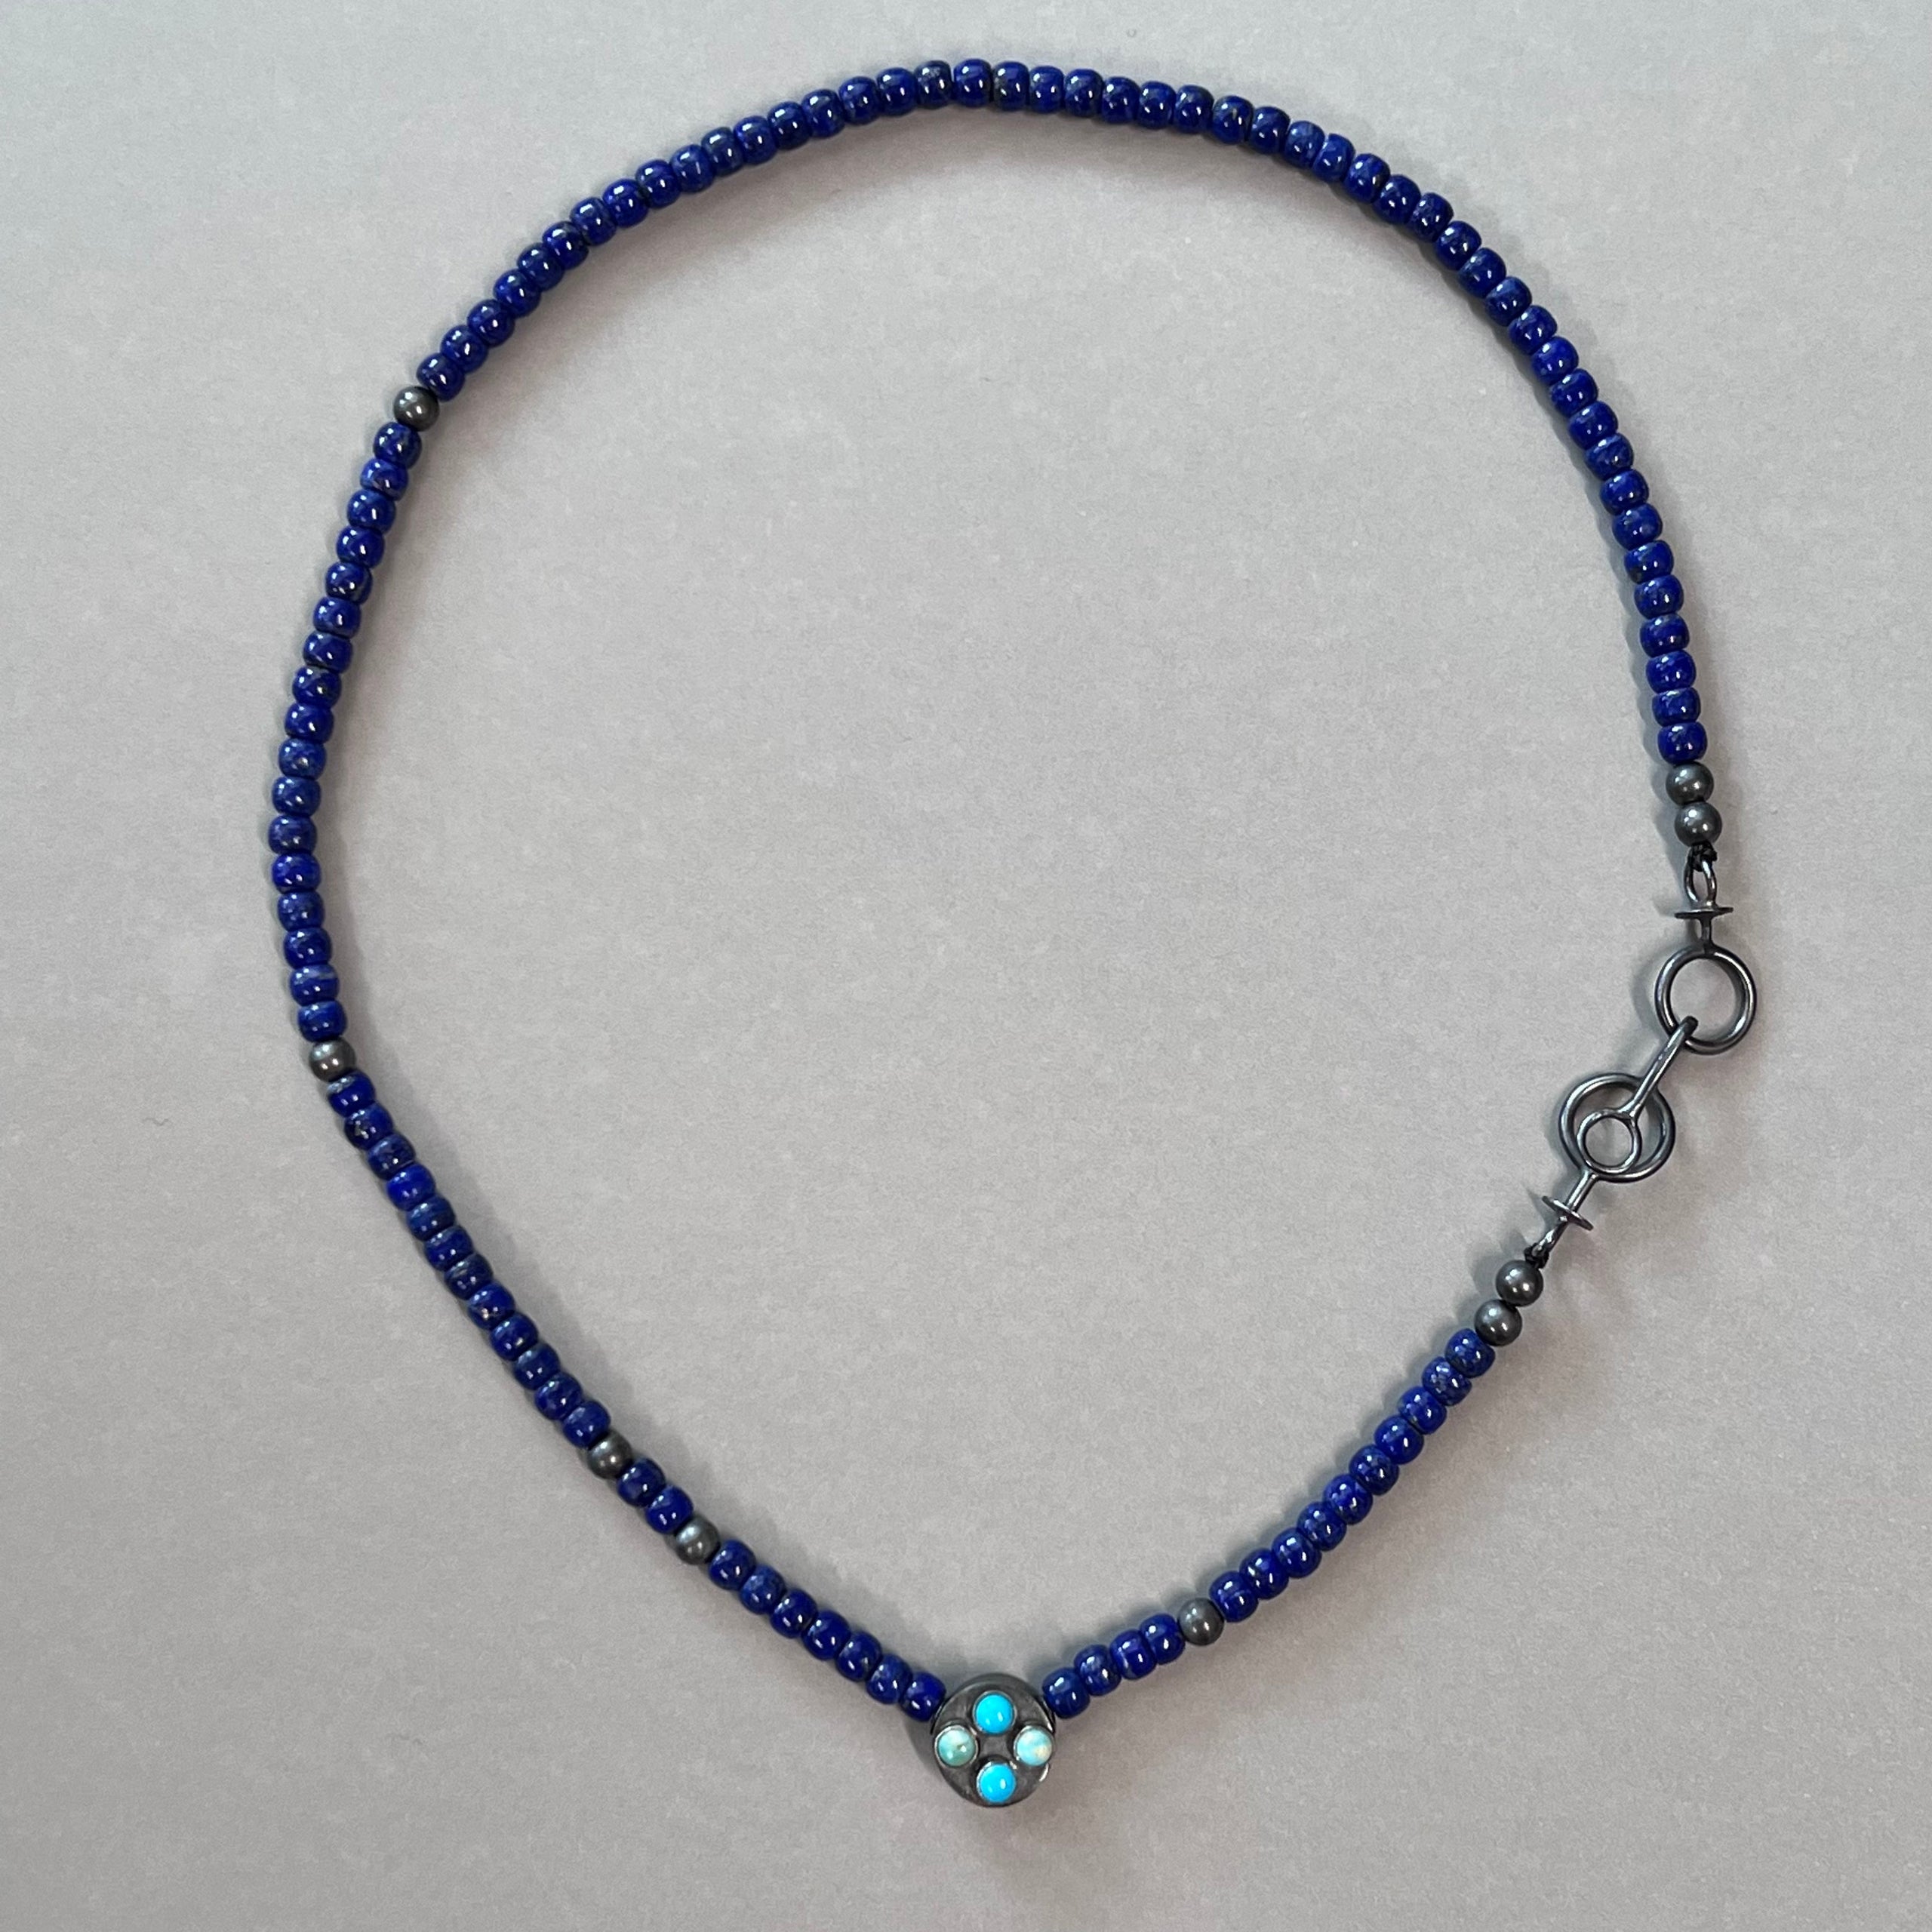 Lapis and Turquoise beaded necklace